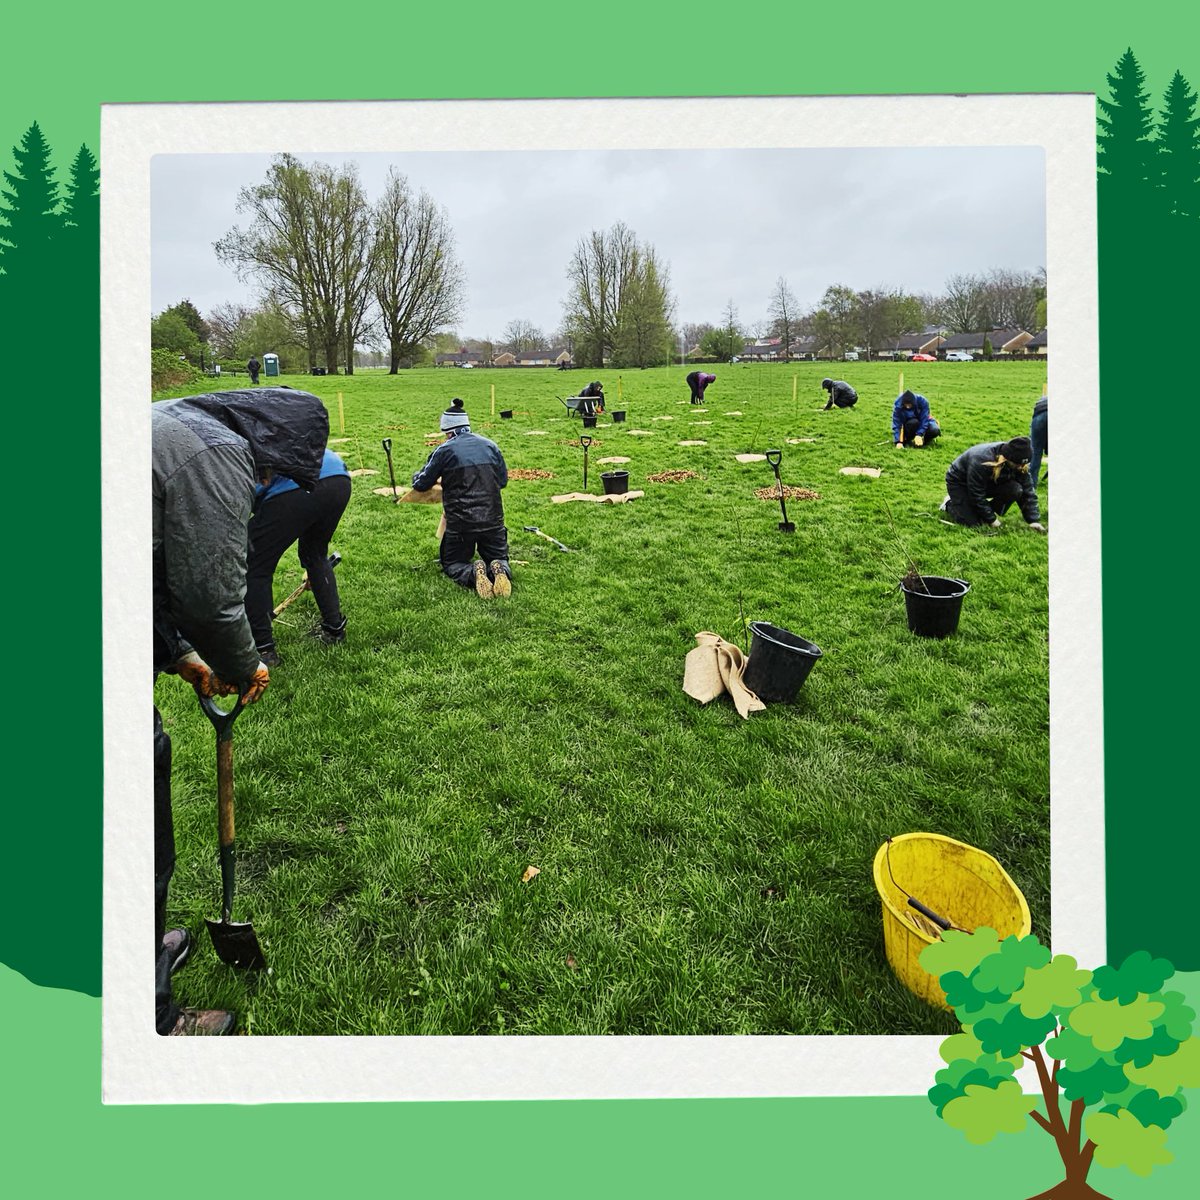 Last week we joined forces with @CityofTreesMcr to plant 332 trees, to create greener spaces and tackle the climate crisis. Thanks to CoT for organising the volunteering opportunity! We appreciate the amazing work you guys are doing! #PlantATree #ClimateAction #GreenSpaces